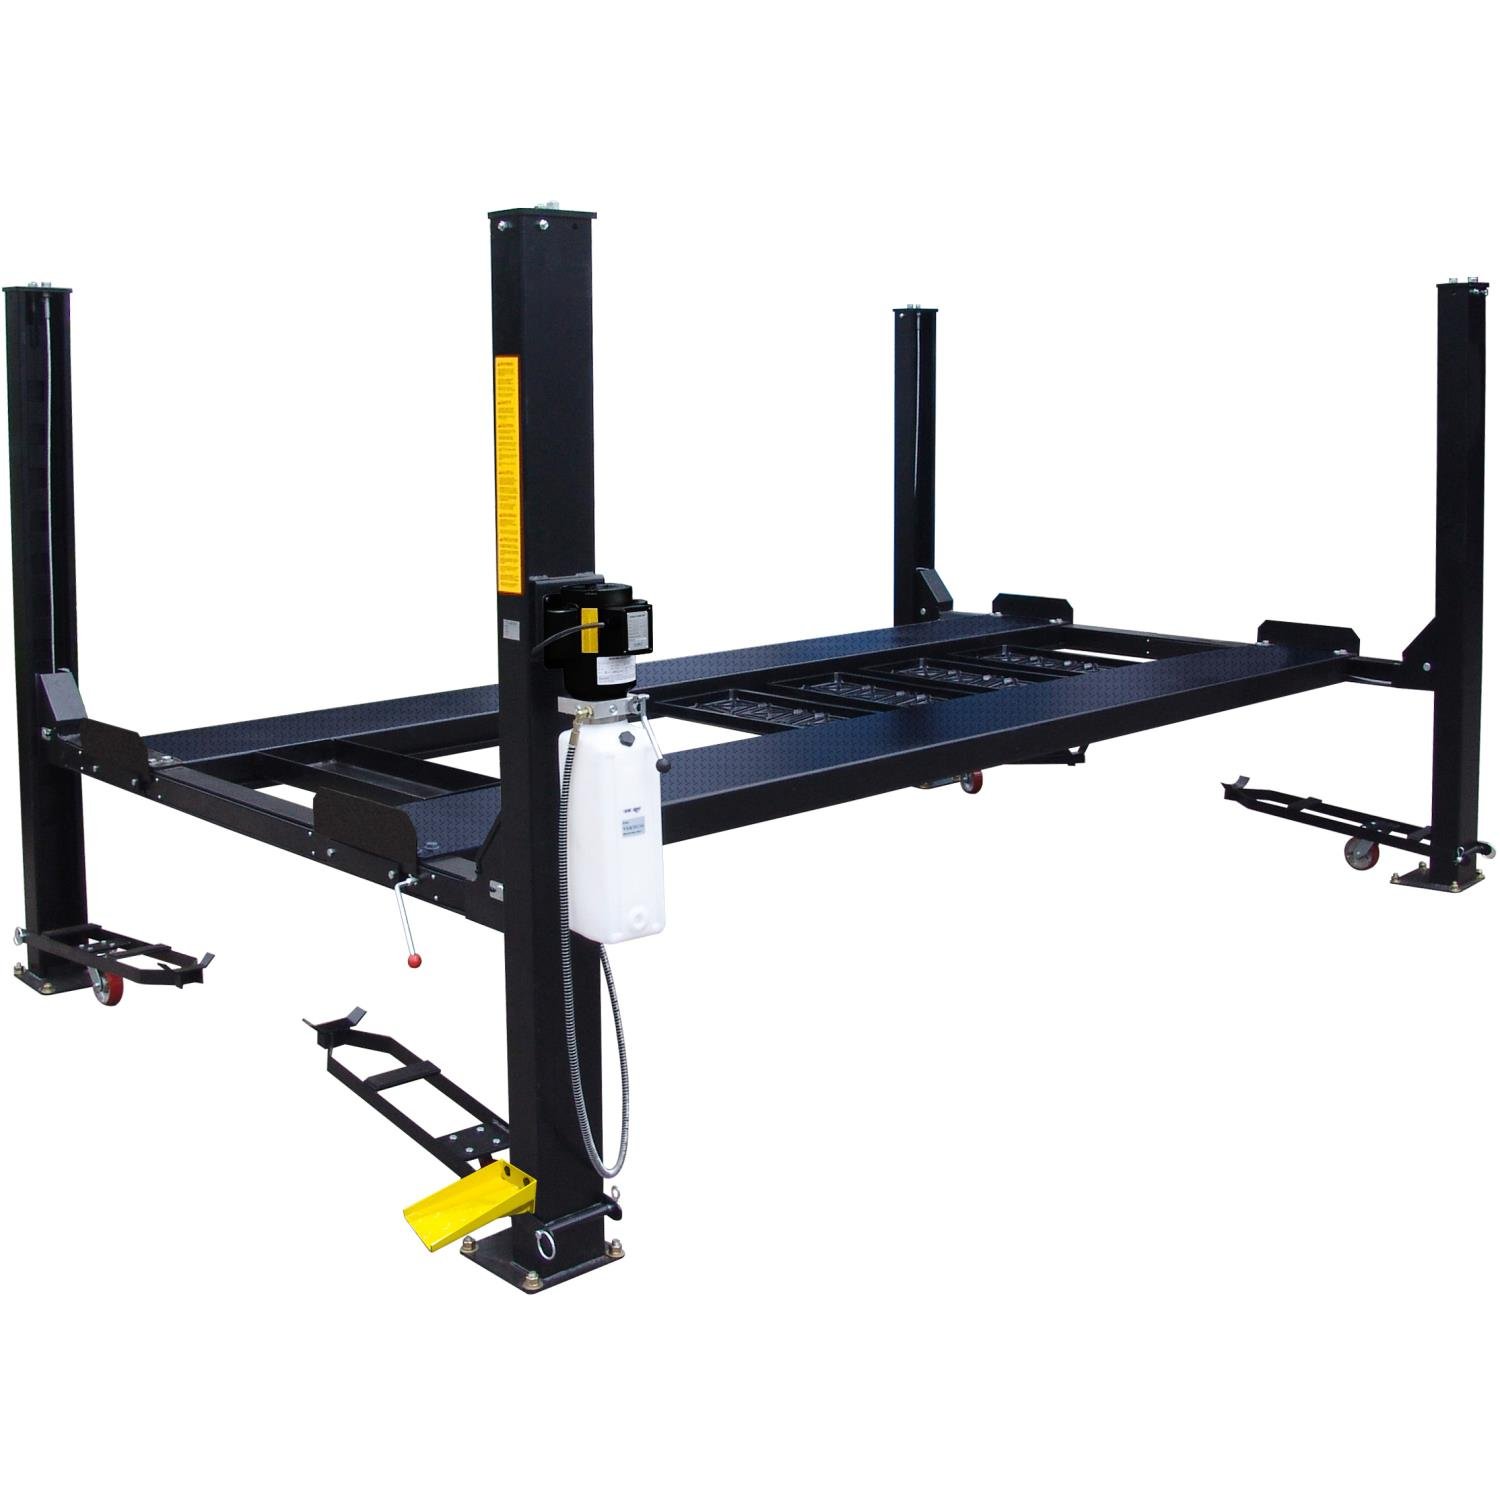 4-Post Automotive Deluxe Extended Storage Lift [9,000 lb. Capacity]